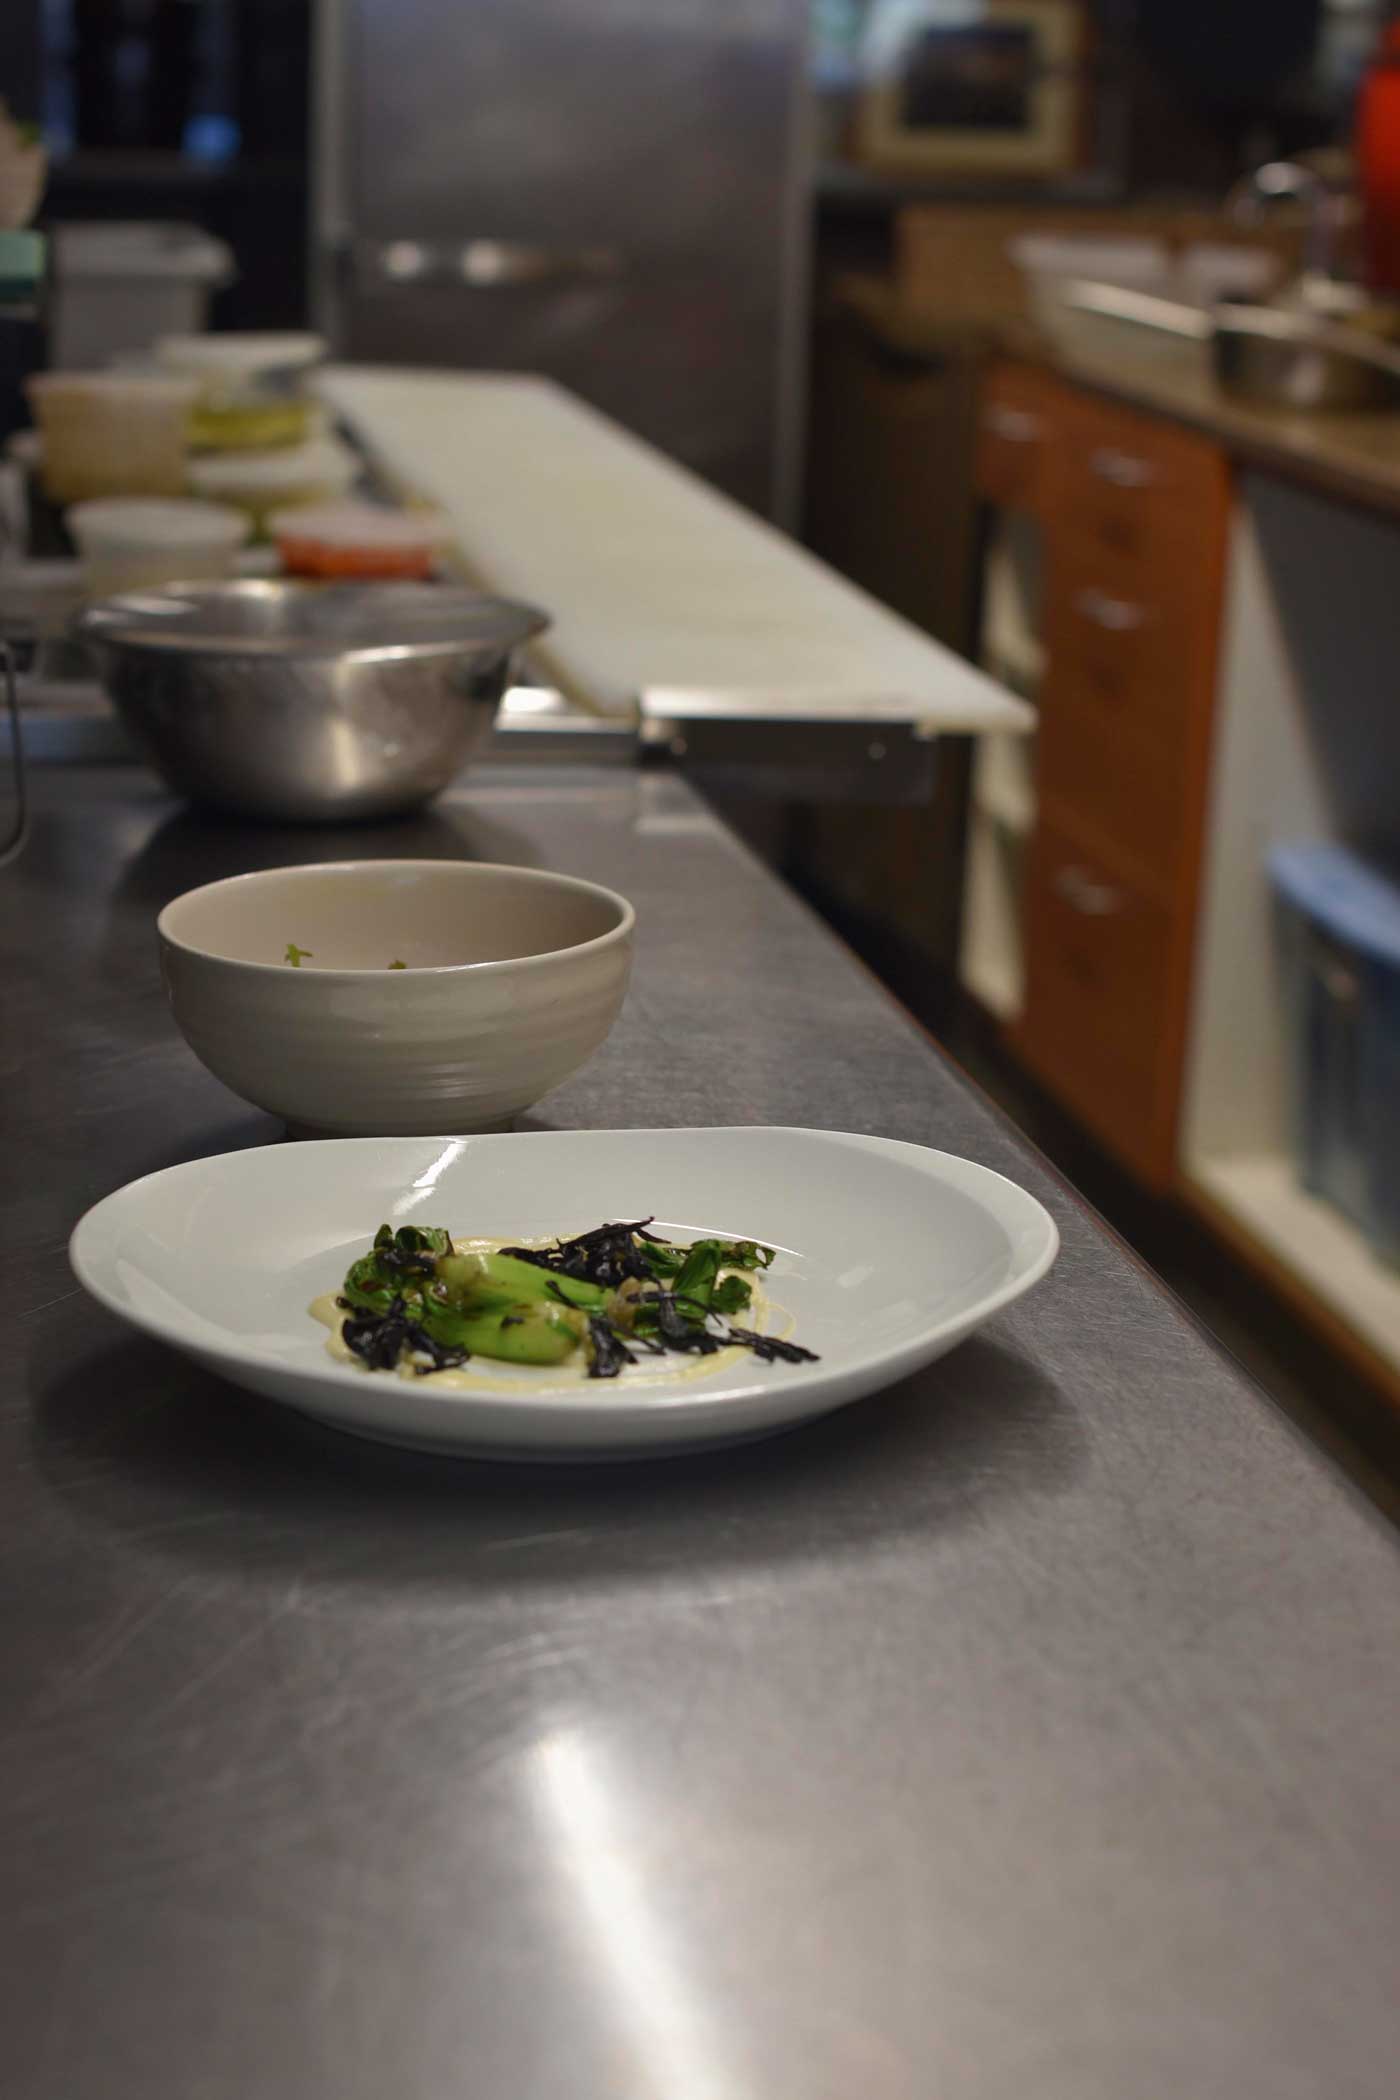 Plates are prepped on the steel counters in Prubehcu's kitchen.